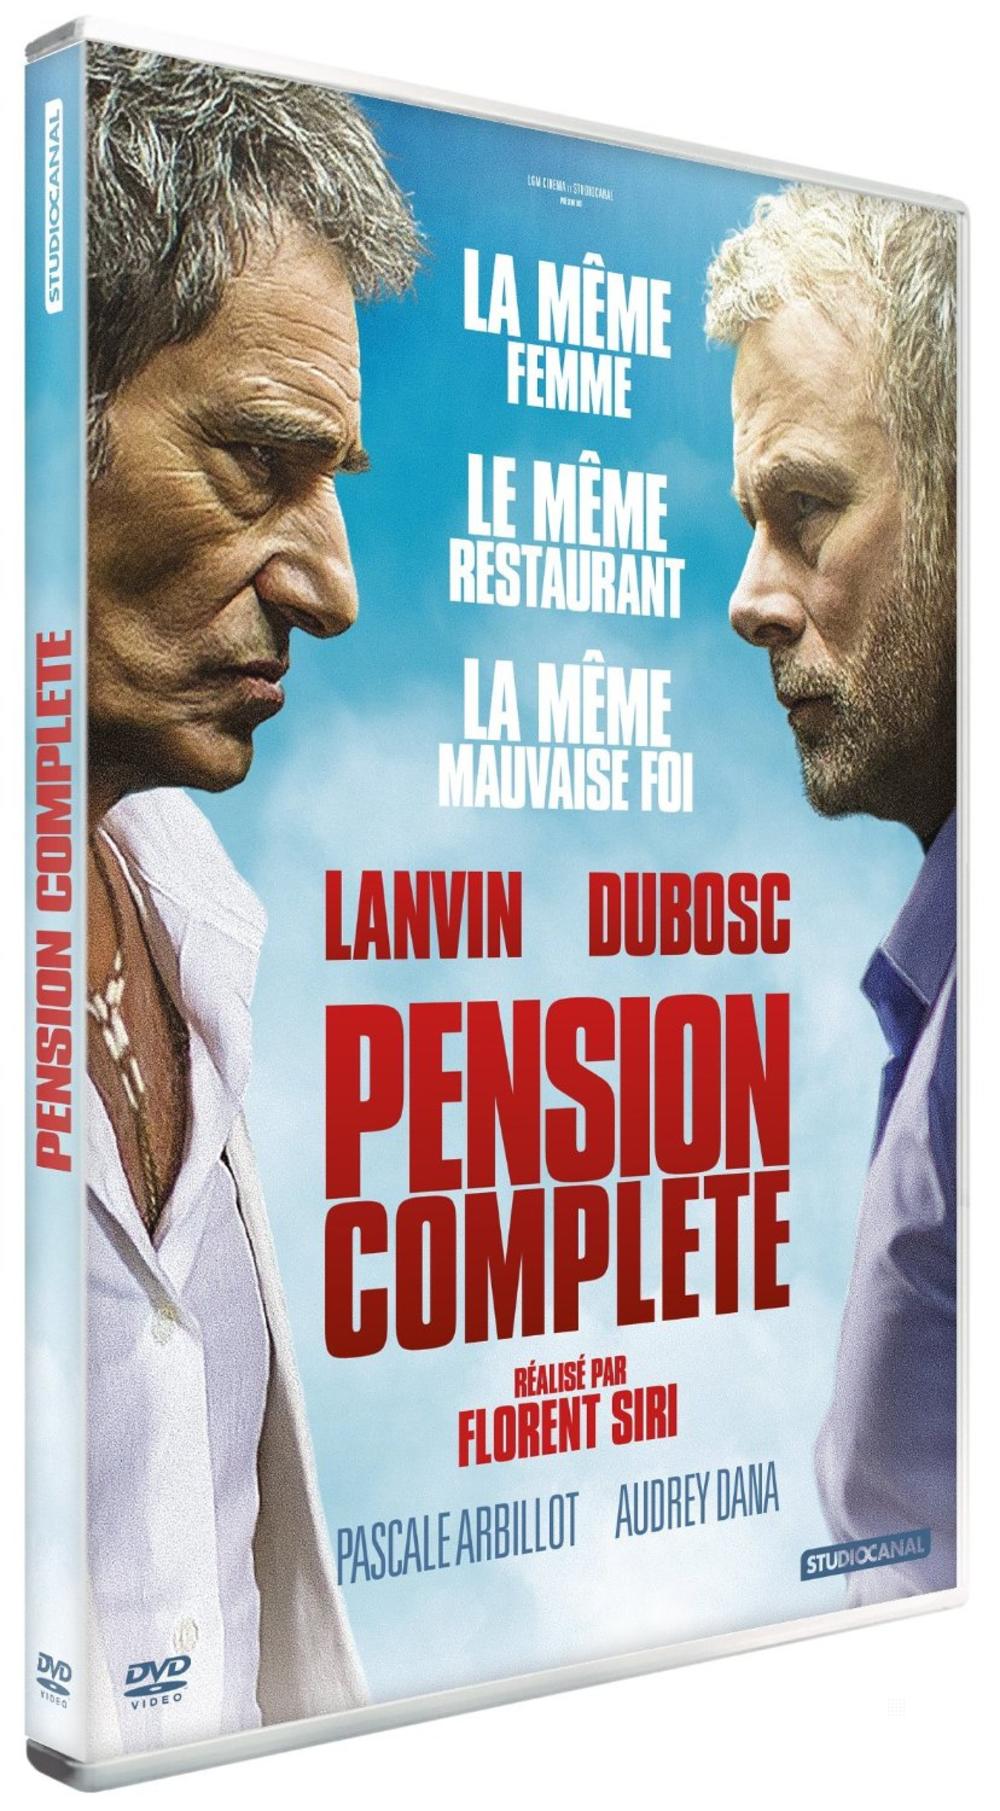 PENSION COMPLETE